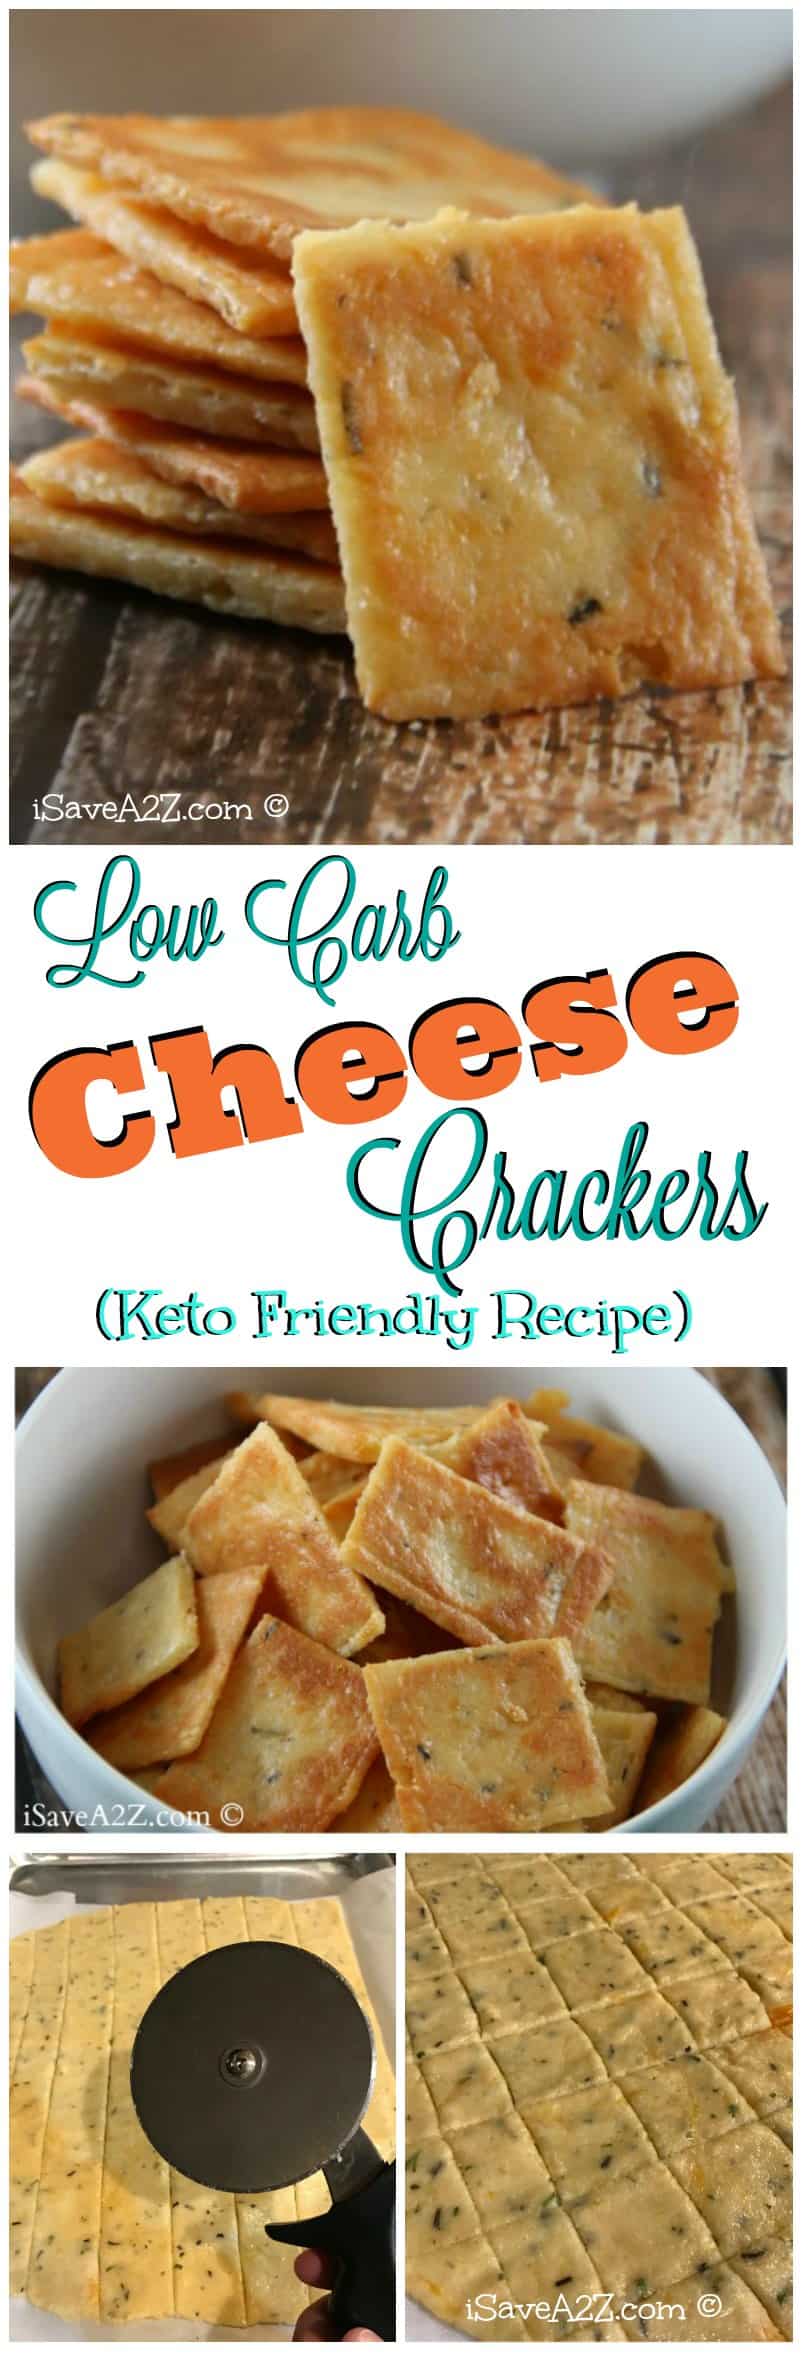 This easy cheese crackers recipe tastes AMAZING!! It's a guilt-free way to enjoy a snack! These low carb cheese are definitely loved by all! WORTH TRYING!